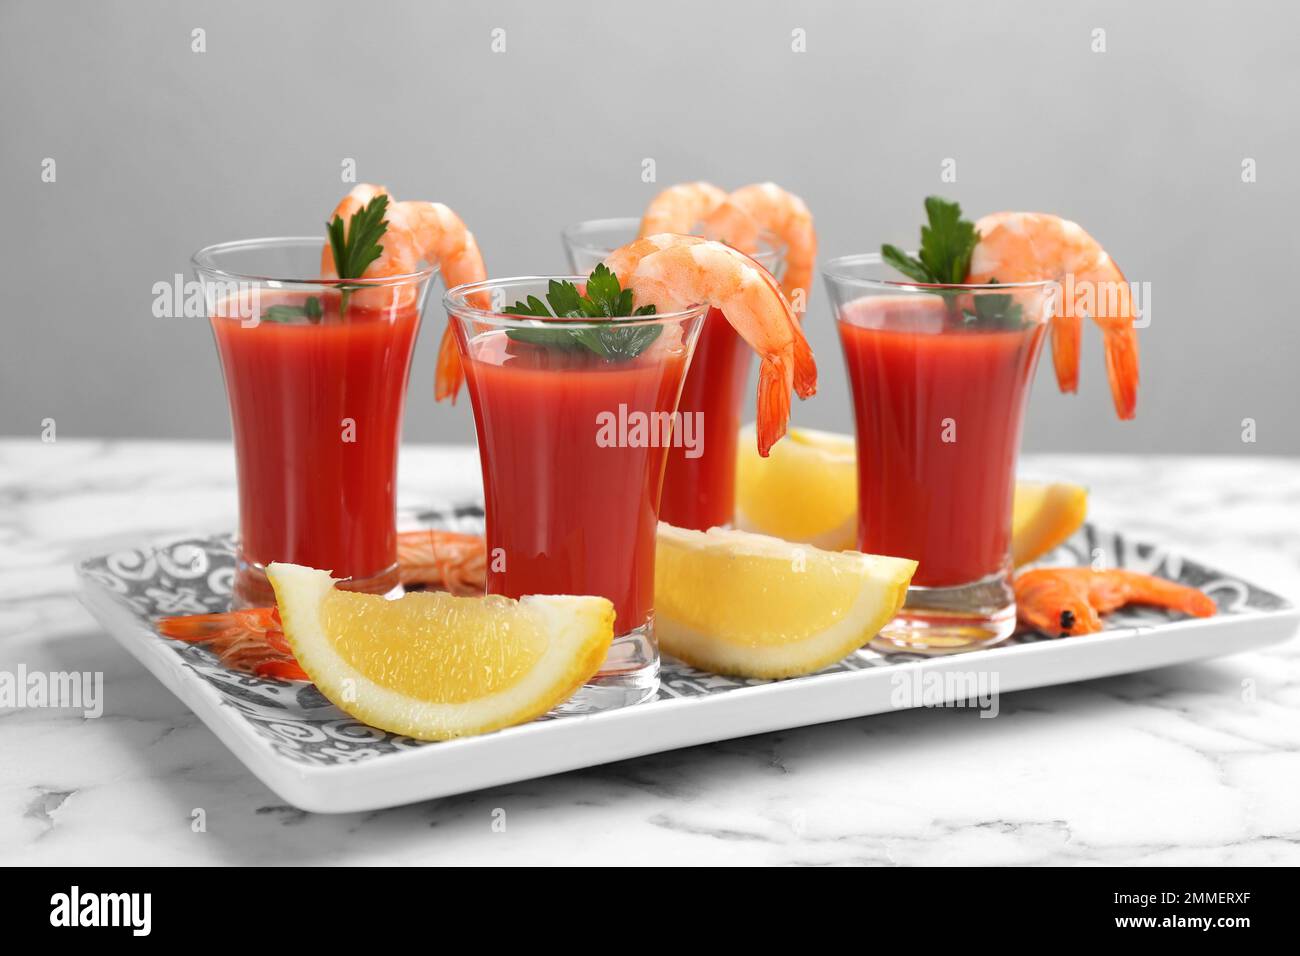 Shrimp cocktail with tomato sauce served on marble table Stock Photo